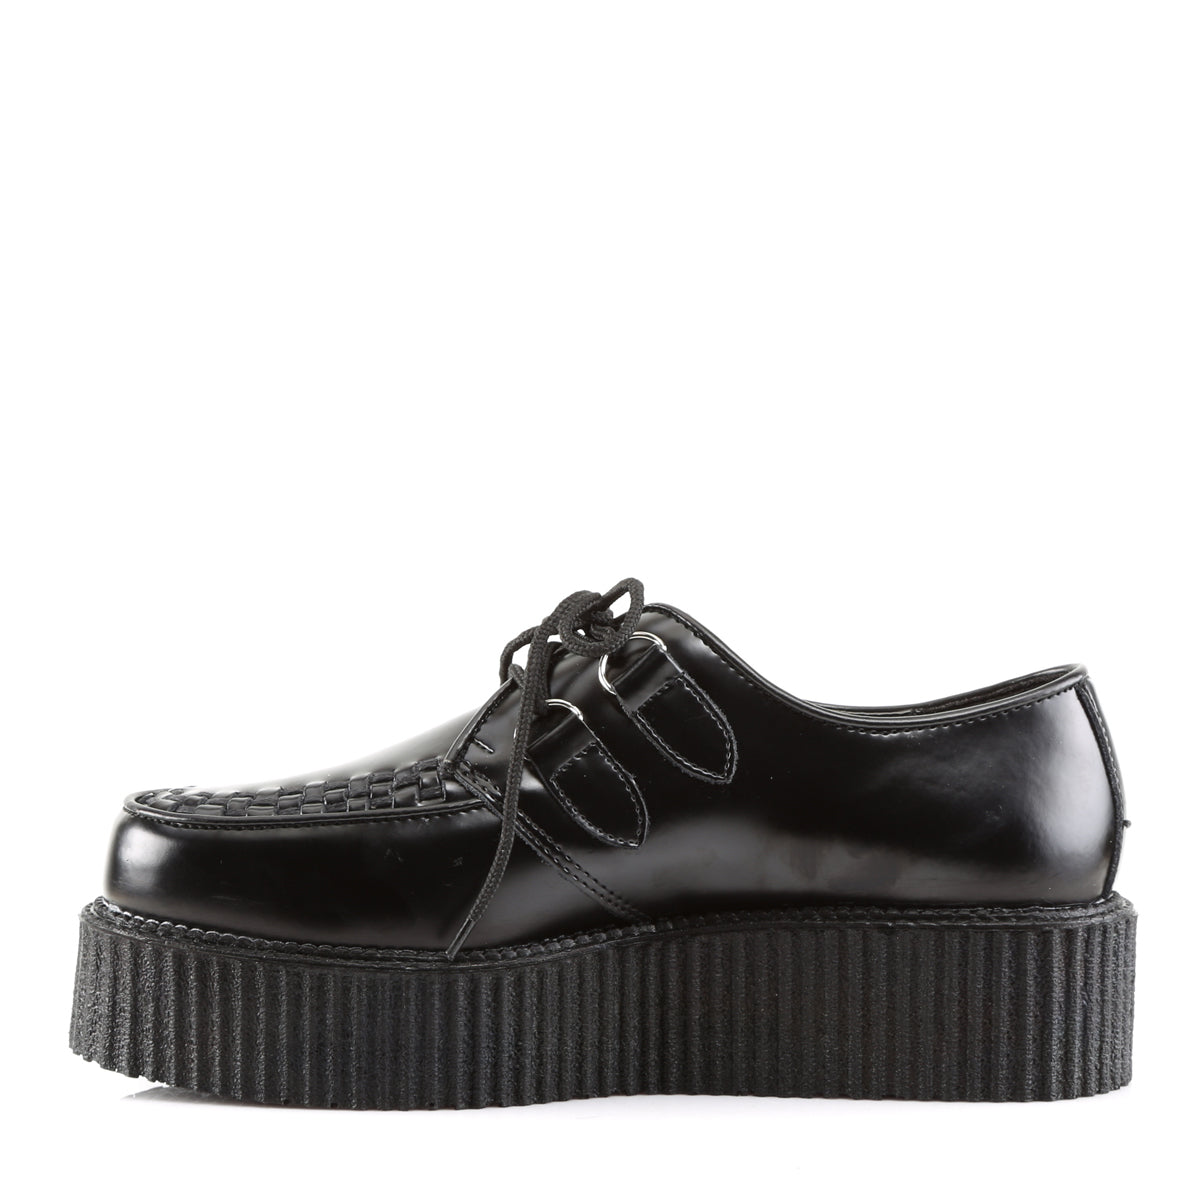 CREEPER-402 - Blk Leather